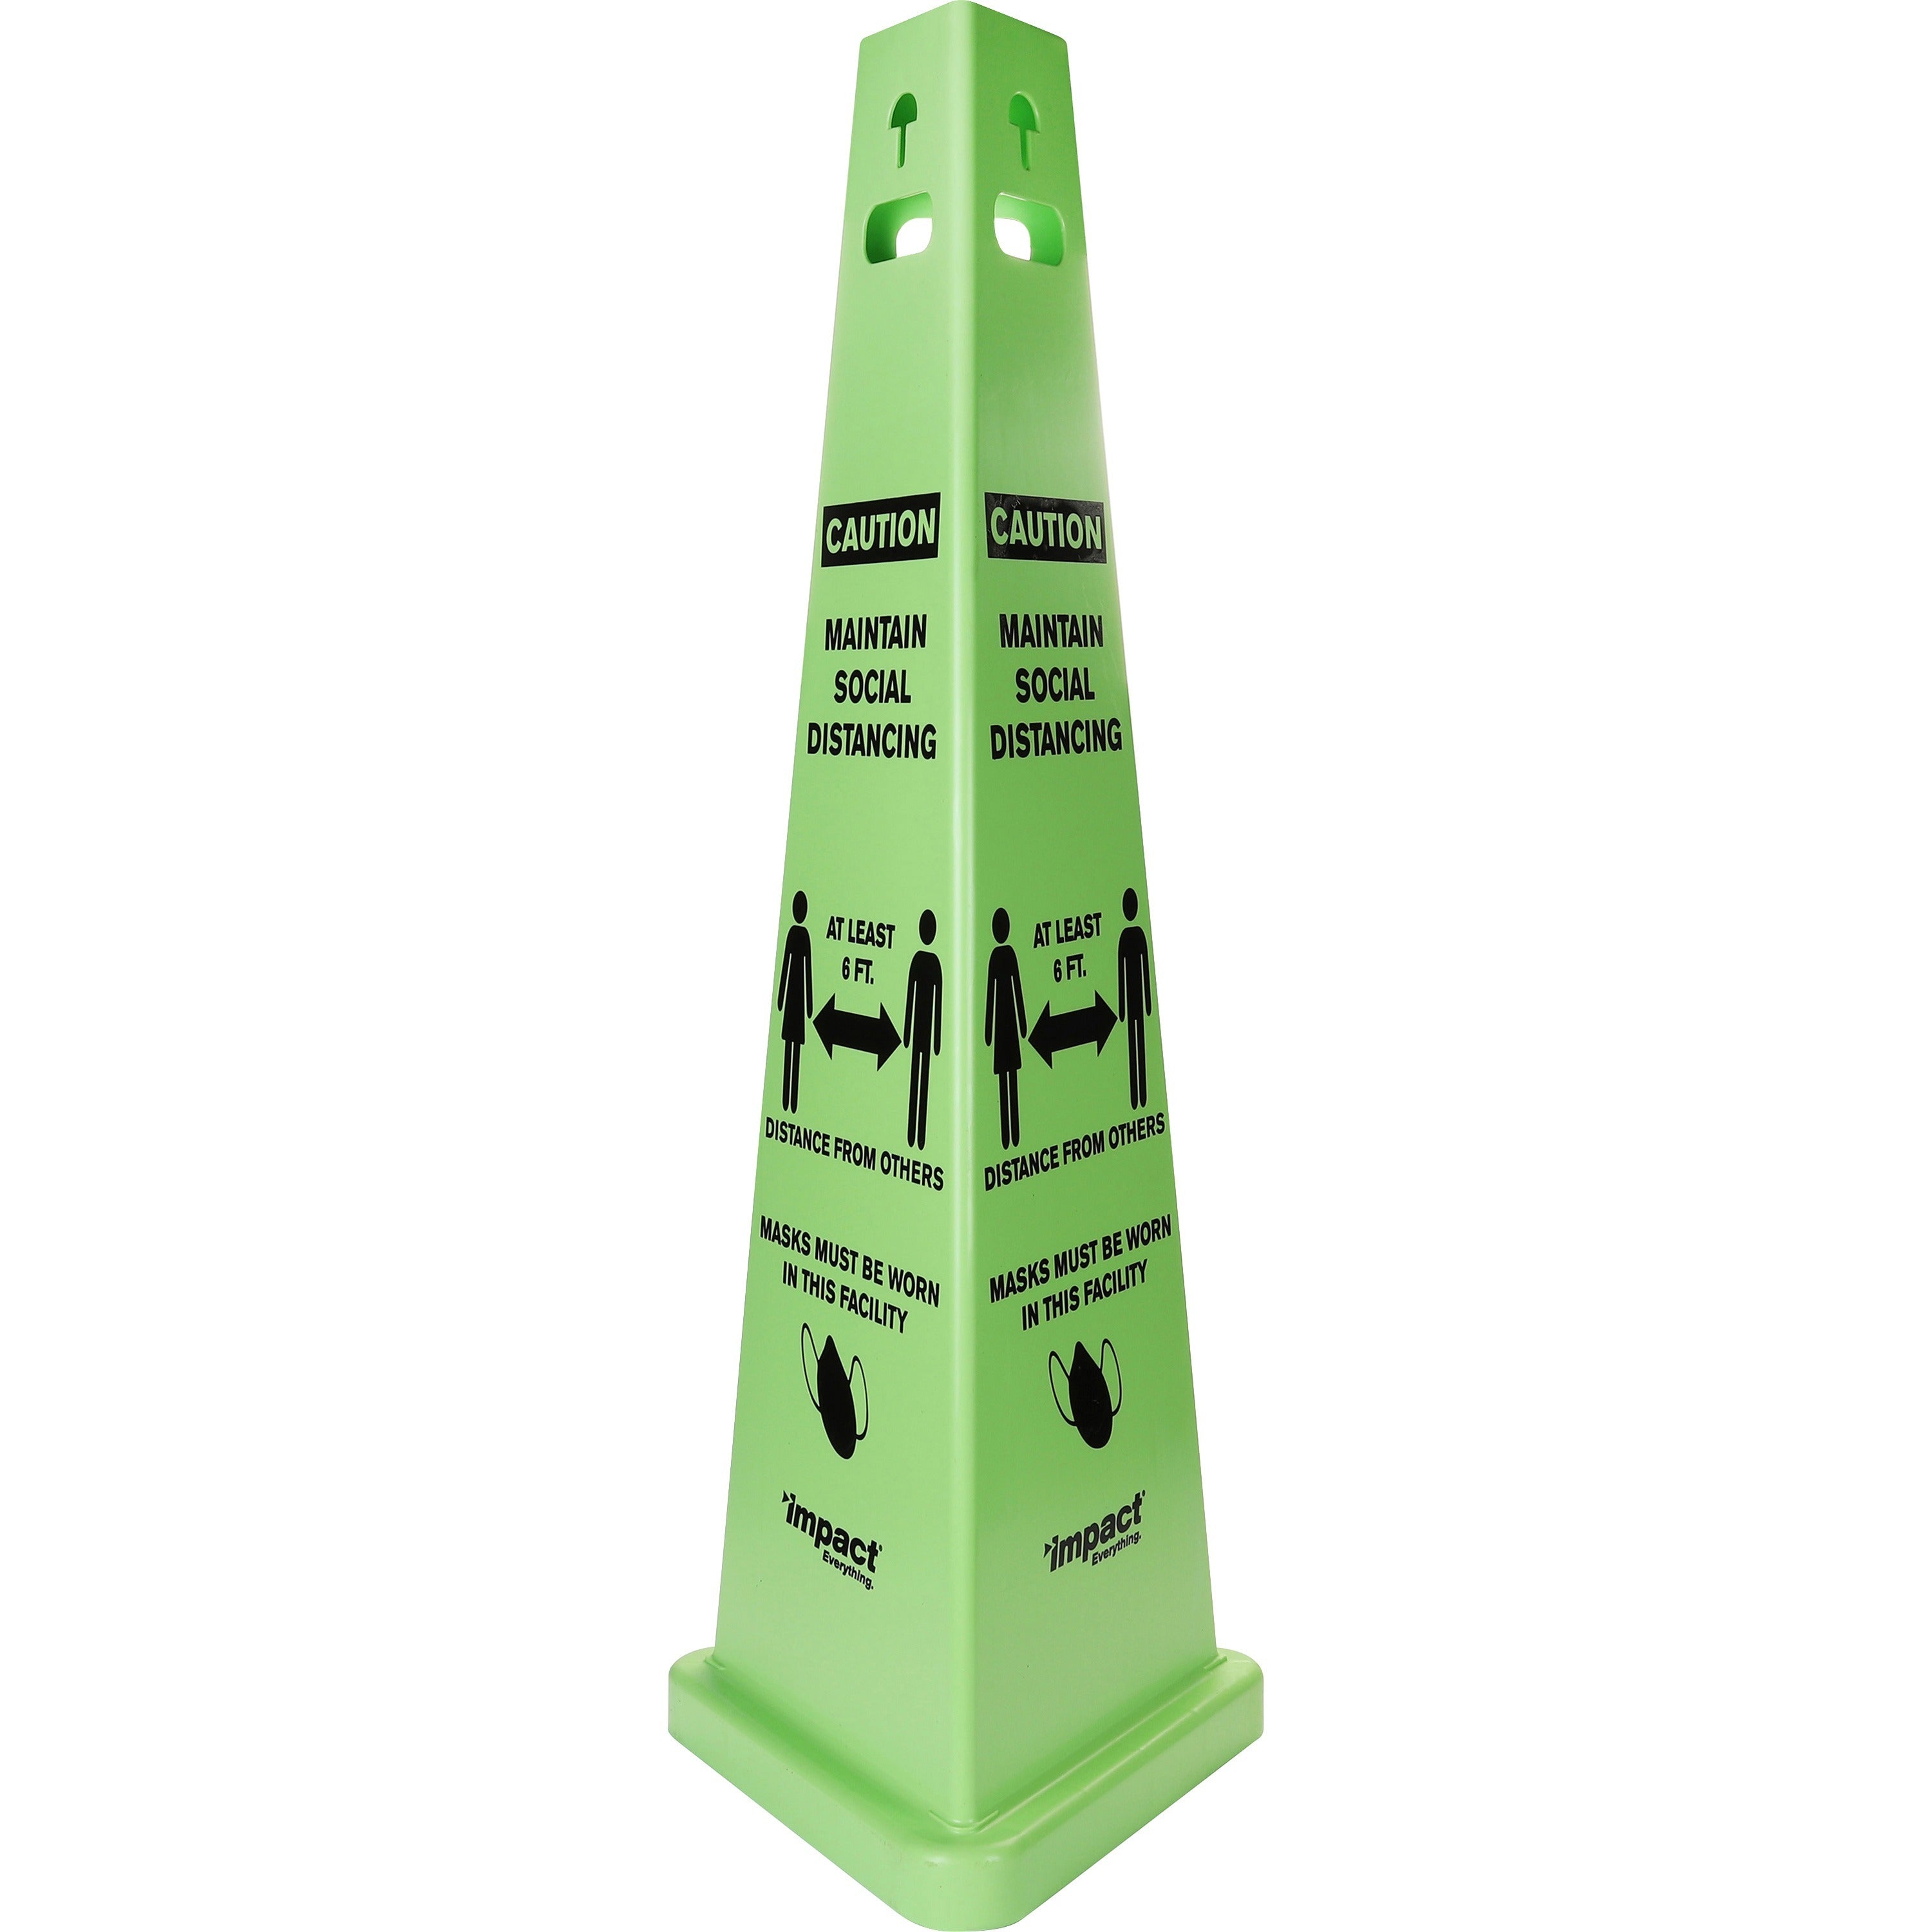 impact-trivu-social-distancing-3-sided-safety-cone-1-each-caution-maintain-social-distancing-print-message-40-height-x-148-depth-cone-shape-three-sided-uv-protected-plastic-fluorescent-yellow_imp9140sm - 1